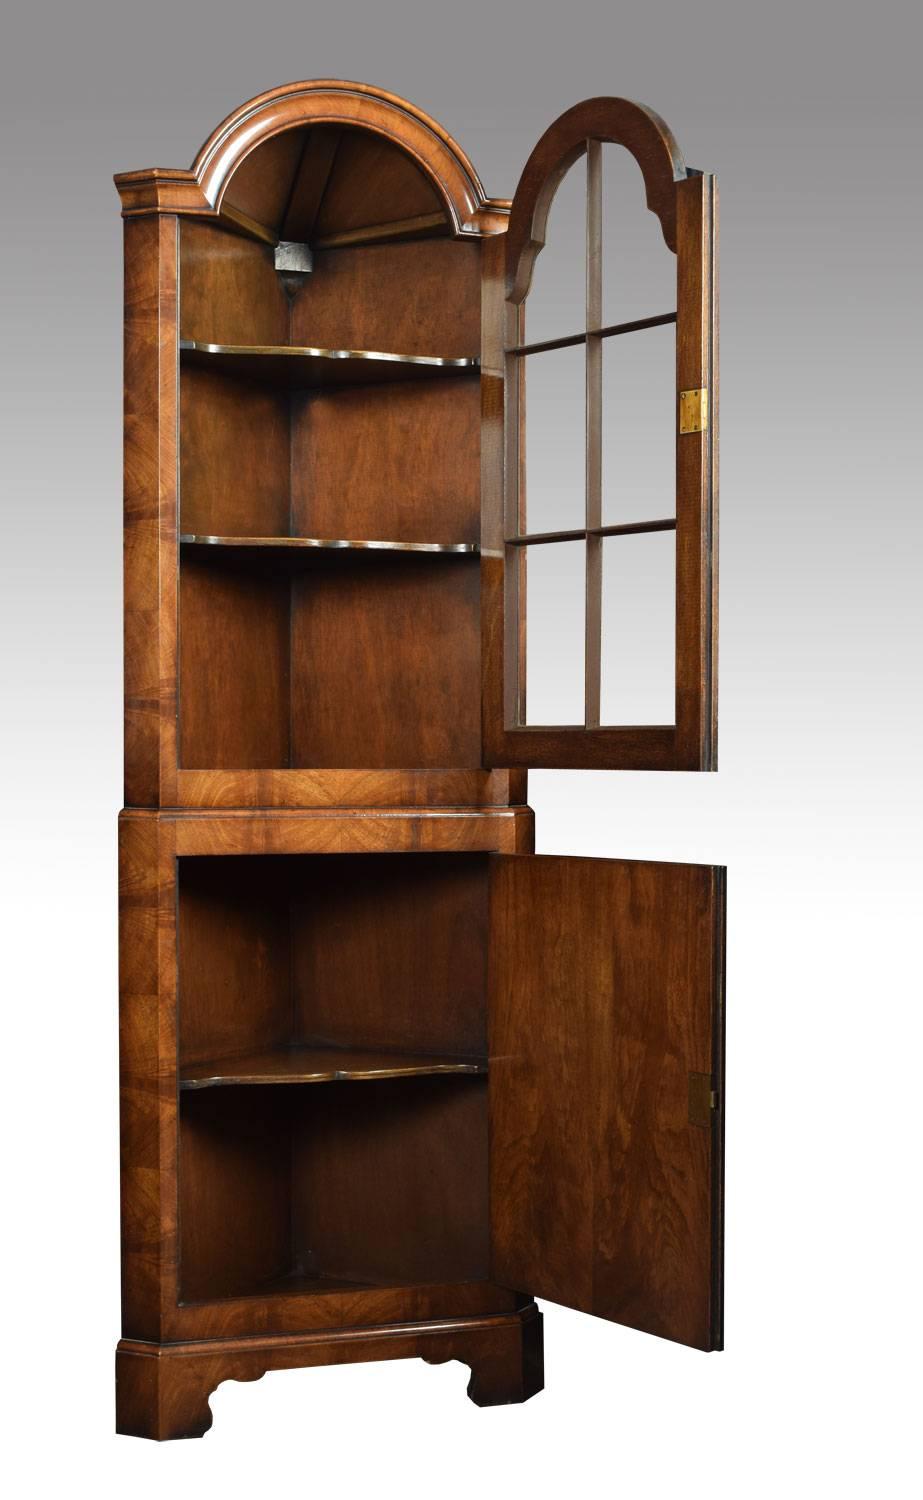 Walnut floor standing corner cabinet, the dome top above single glazed door enclosing two fixed shelves to the base section with a panelled cabinet door opening to reveal single fixed shelf all raised up on bracket feet.
Dimensions:
Height 71.5